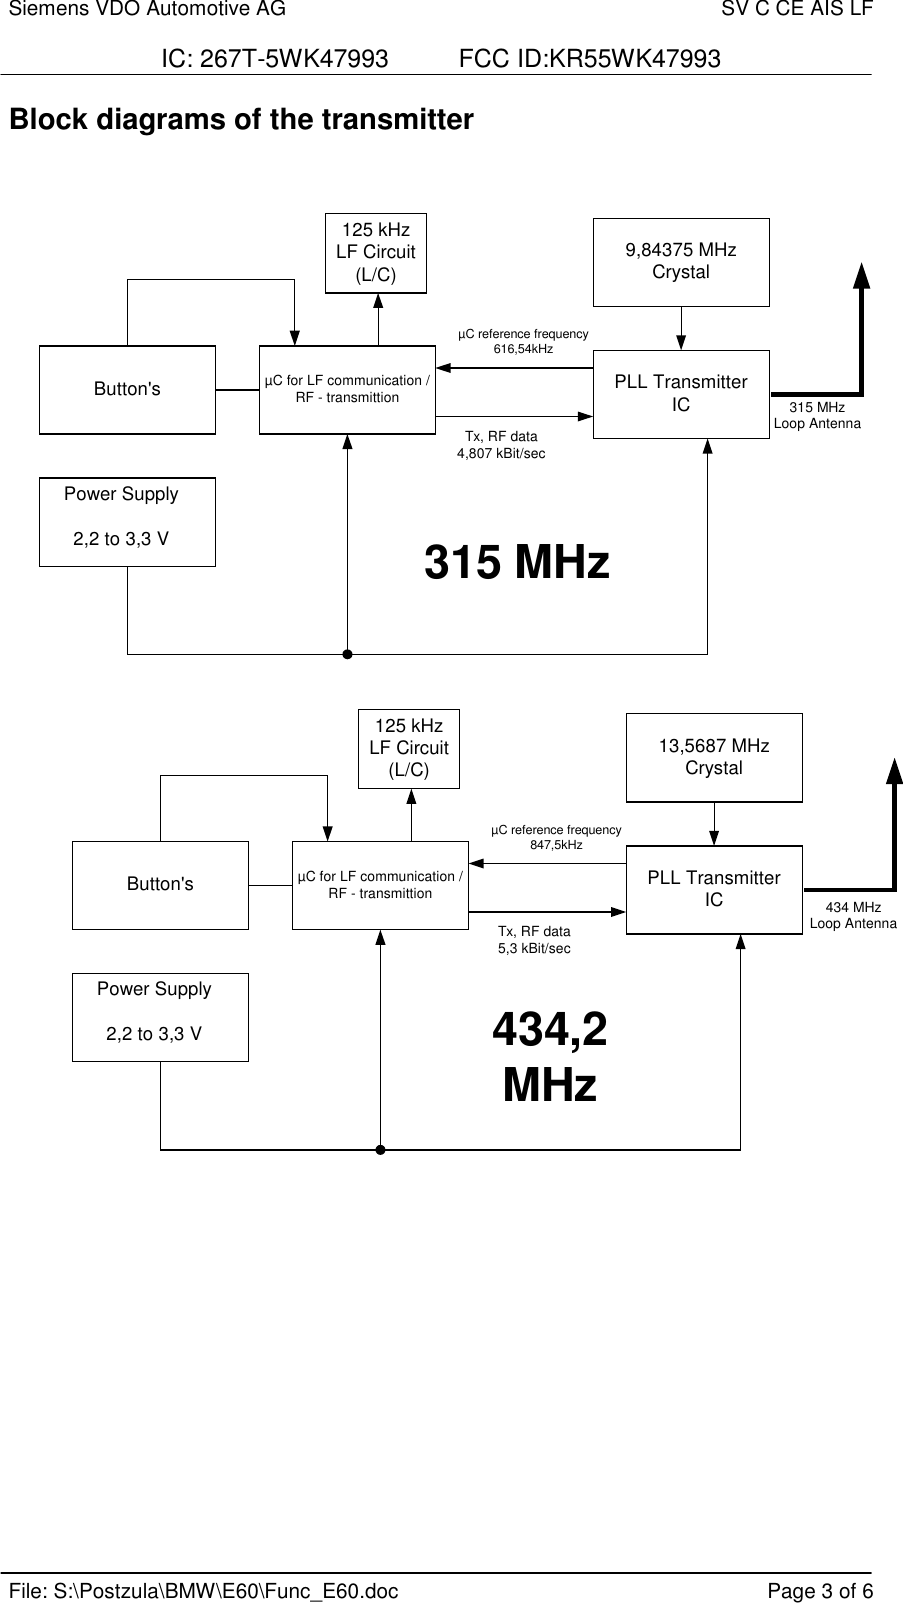 Siemens VDO Automotive AG SV C CE AIS LFIC: 267T-5WK47993          FCC ID:KR55WK47993File: S:\Postzula\BMW\E60\Func_E60.doc Page 3 of 6Block diagrams of the transmitterButton&apos;s PLL TransmitterIC9,84375 MHzCrystal125 kHzLF Circuit(L/C)315 MHzLoop AntennaµC for LF communication /RF - transmittionPower Supply2,2 to 3,3 VµC reference frequency616,54kHzTx, RF data4,807 kBit/sec315 MHzButton&apos;s PLL TransmitterIC13,5687 MHzCrystal125 kHzLF Circuit(L/C)µC for LF communication /RF - transmittionPower Supply2,2 to 3,3 VµC reference frequency847,5kHzTx, RF data5,3 kBit/sec434,2MHz434 MHzLoop Antenna